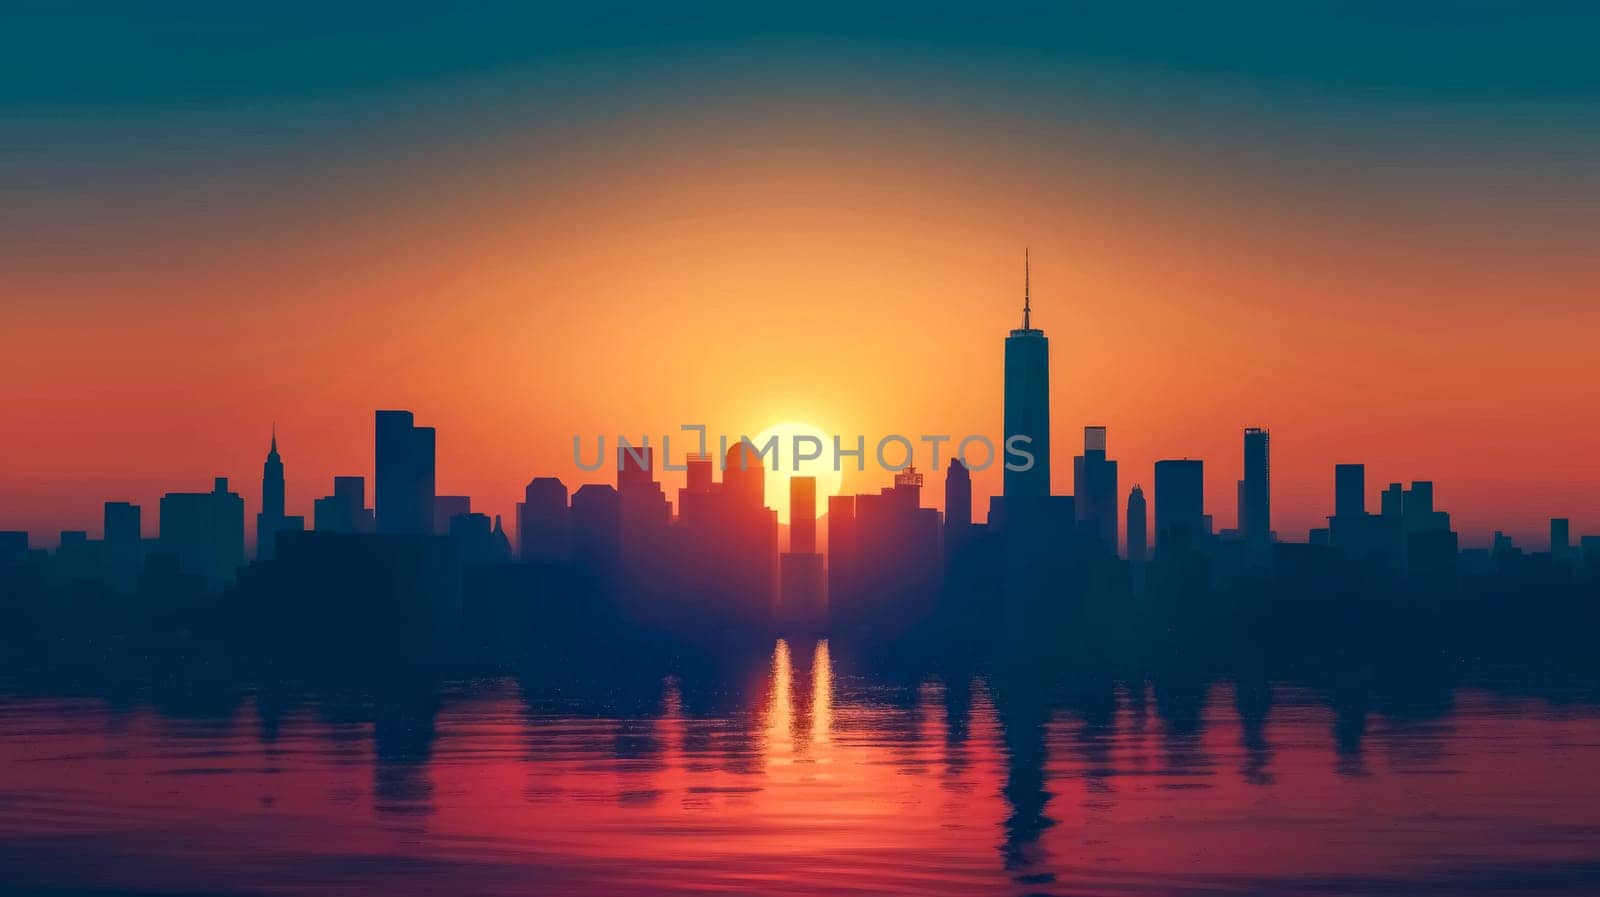 City skyline silhouetted against a vibrant sunrise, with reflections on the water by Edophoto